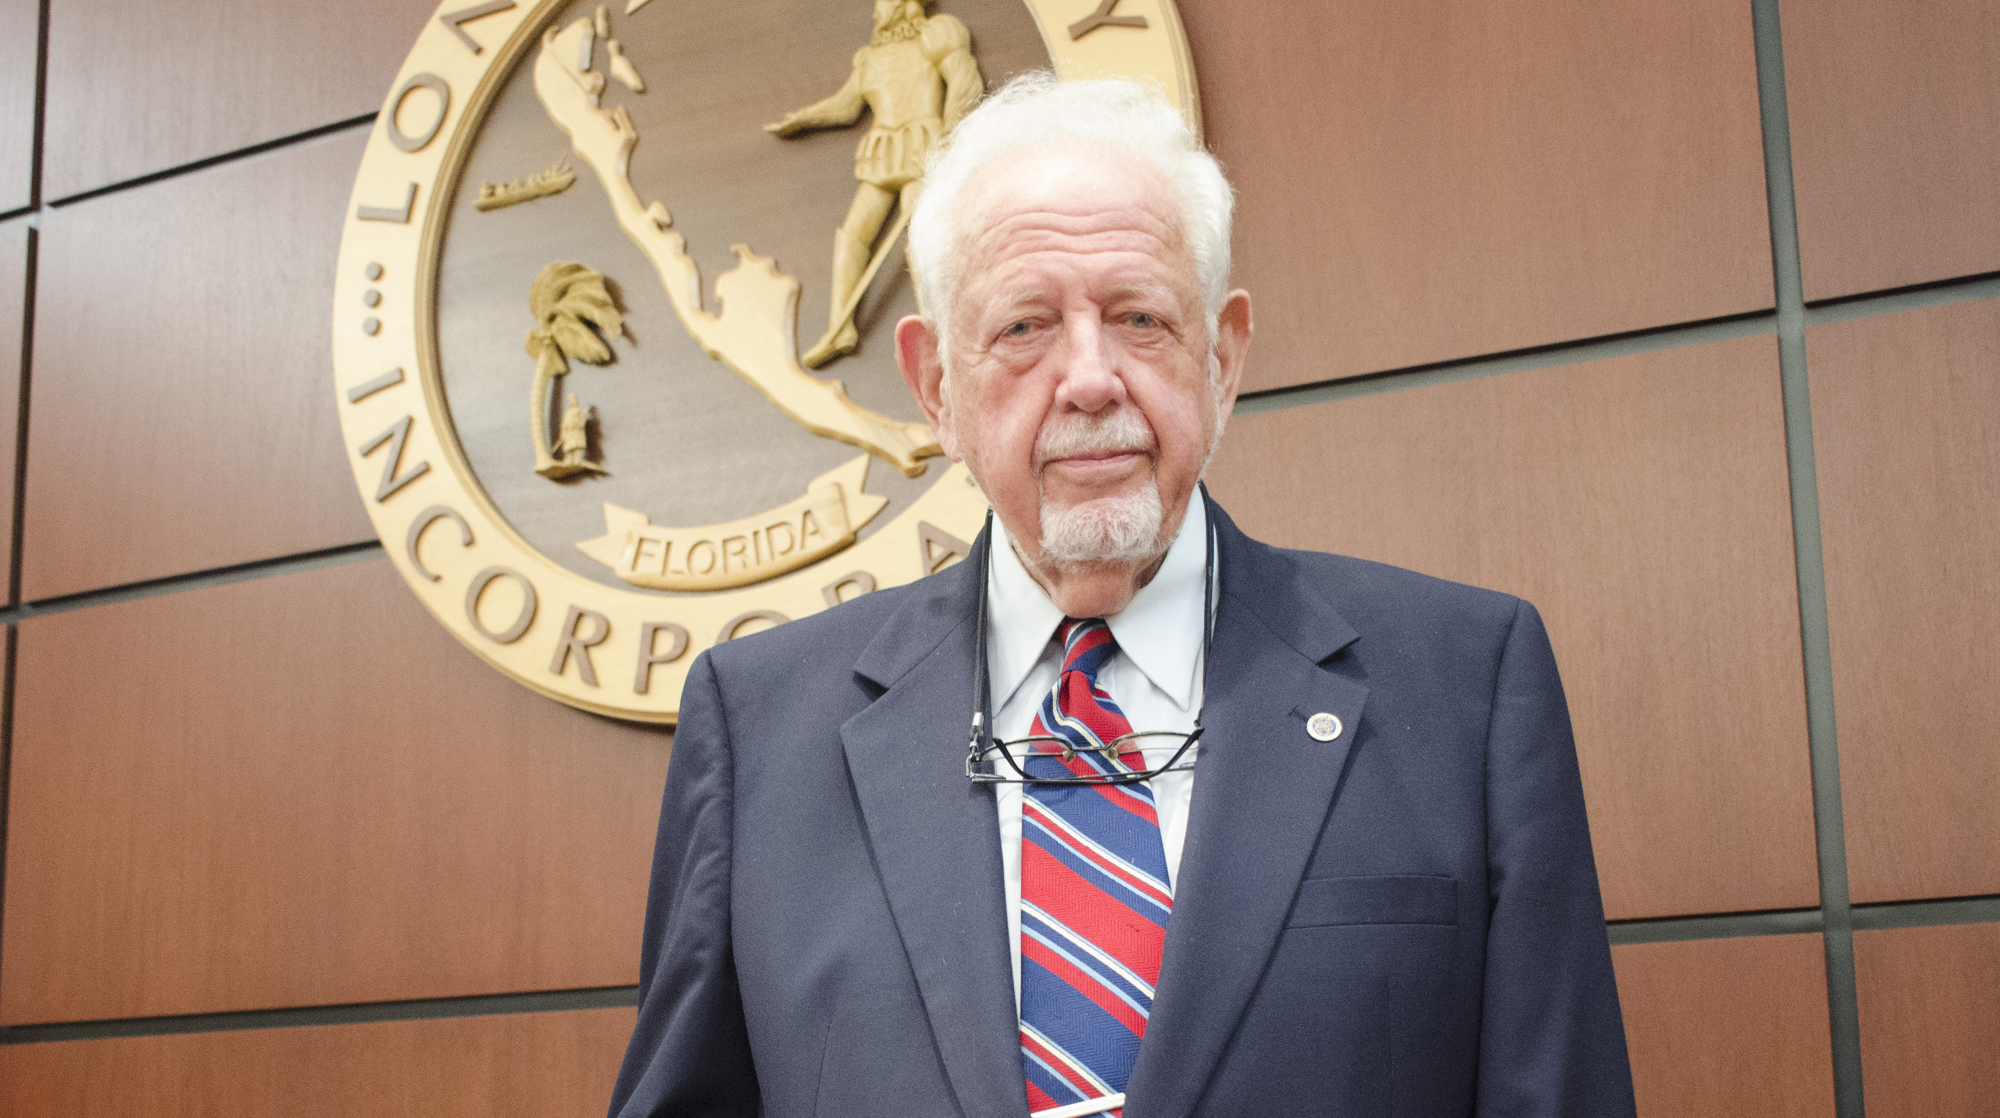 Even though George Spoll's tenure on the Town Commission ended in March, he still leads the Longboat Key Revitalization Task Force and he serves on the board of directors for the Federation of Longboat Key Condominiums.